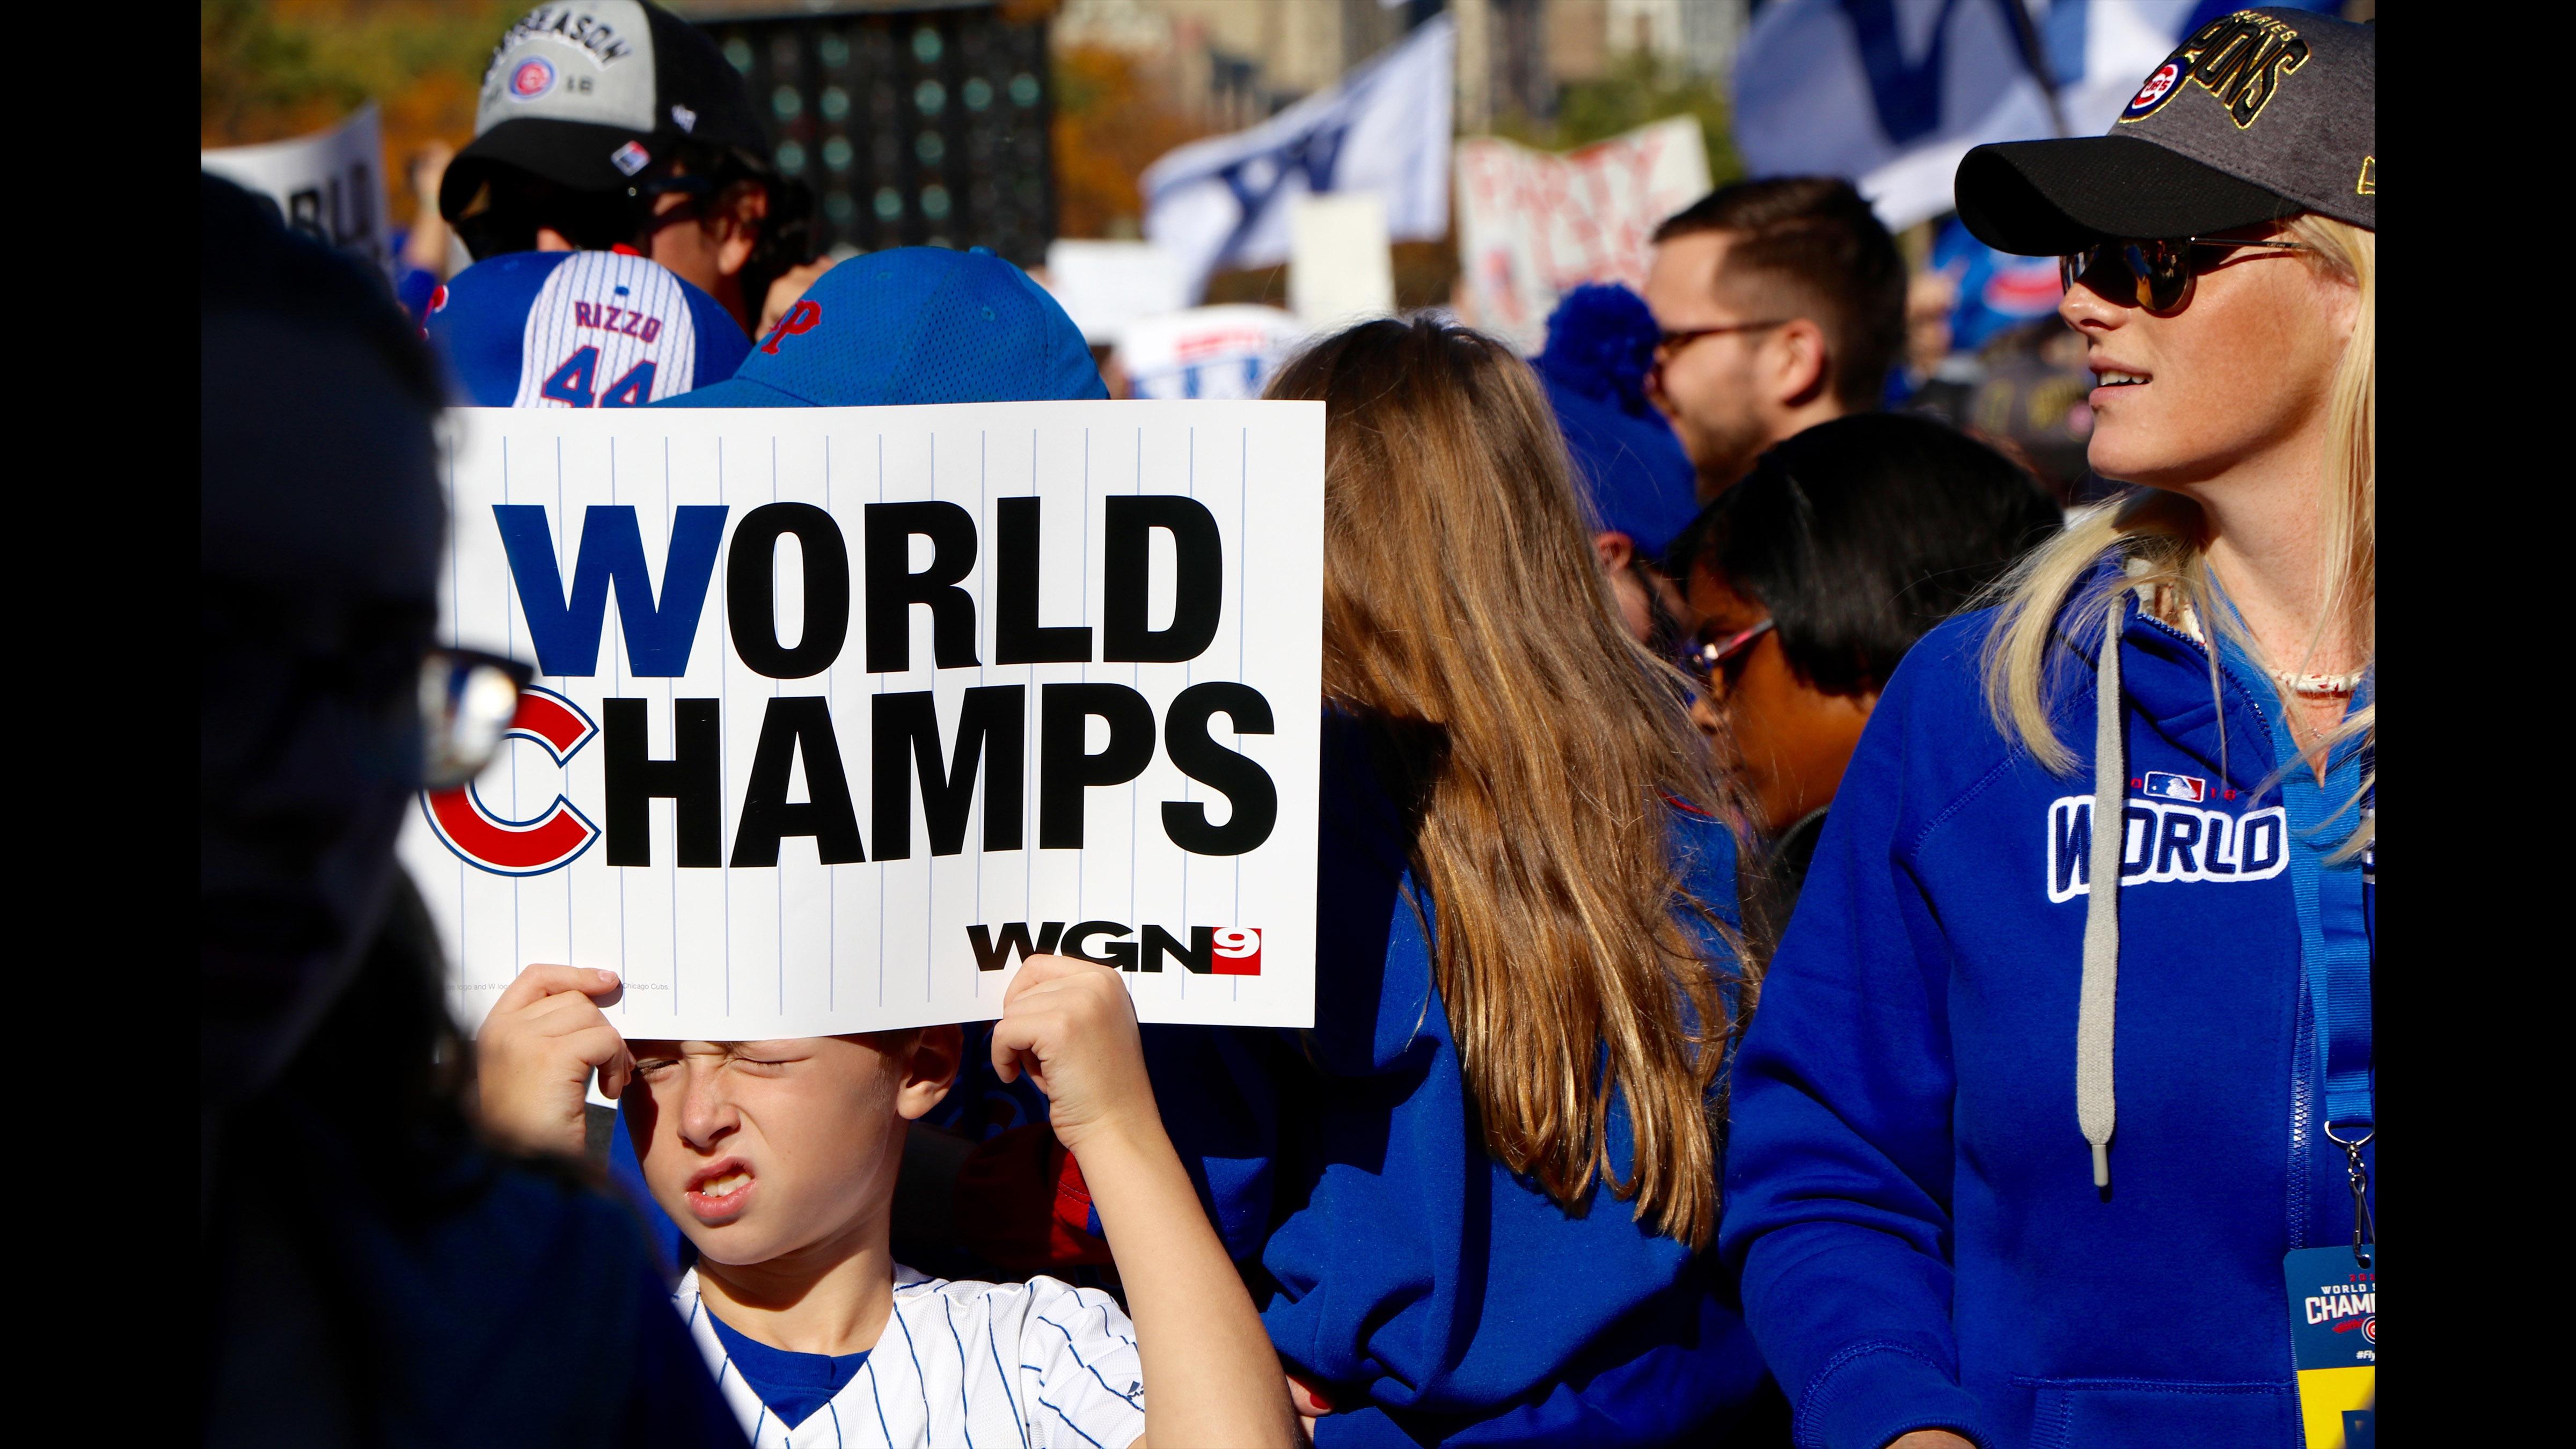 Chicago Cubs, Joe Maddon Search for World Series Repeat